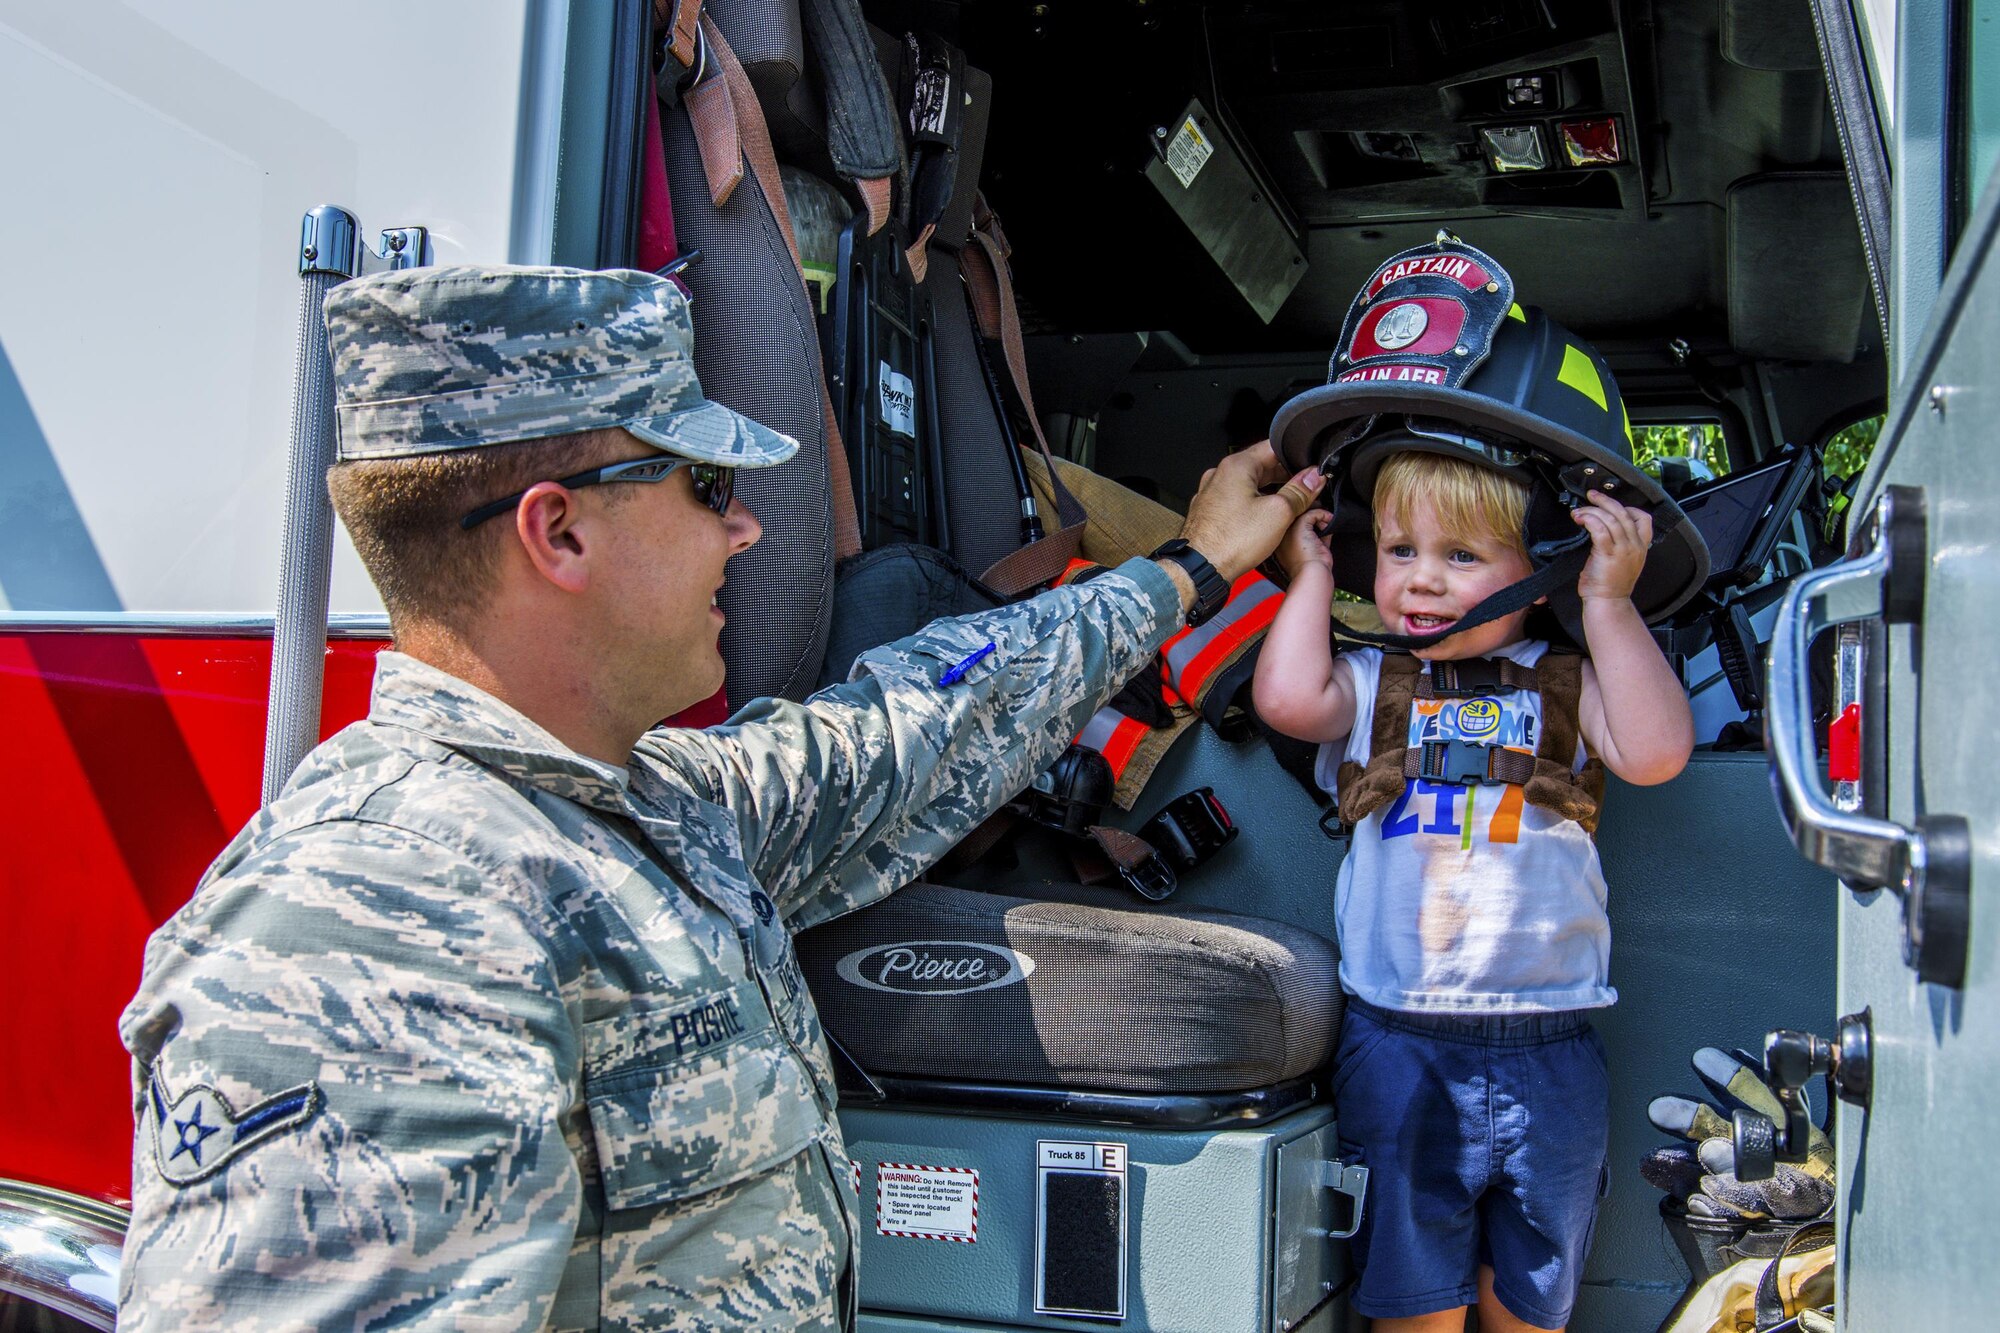 Airman Basic Bryce Postle, 445th Airlift Wing journeyman firefighter, helps hold a firefighter helmet for a toddler during Big Truck Day, July 28, Destin, Fla. Fire, construction, garbage and utility trucks were on display for kids to see up close at the city’s annual event. (U.S. Air Force photo/Kristin Stewart)